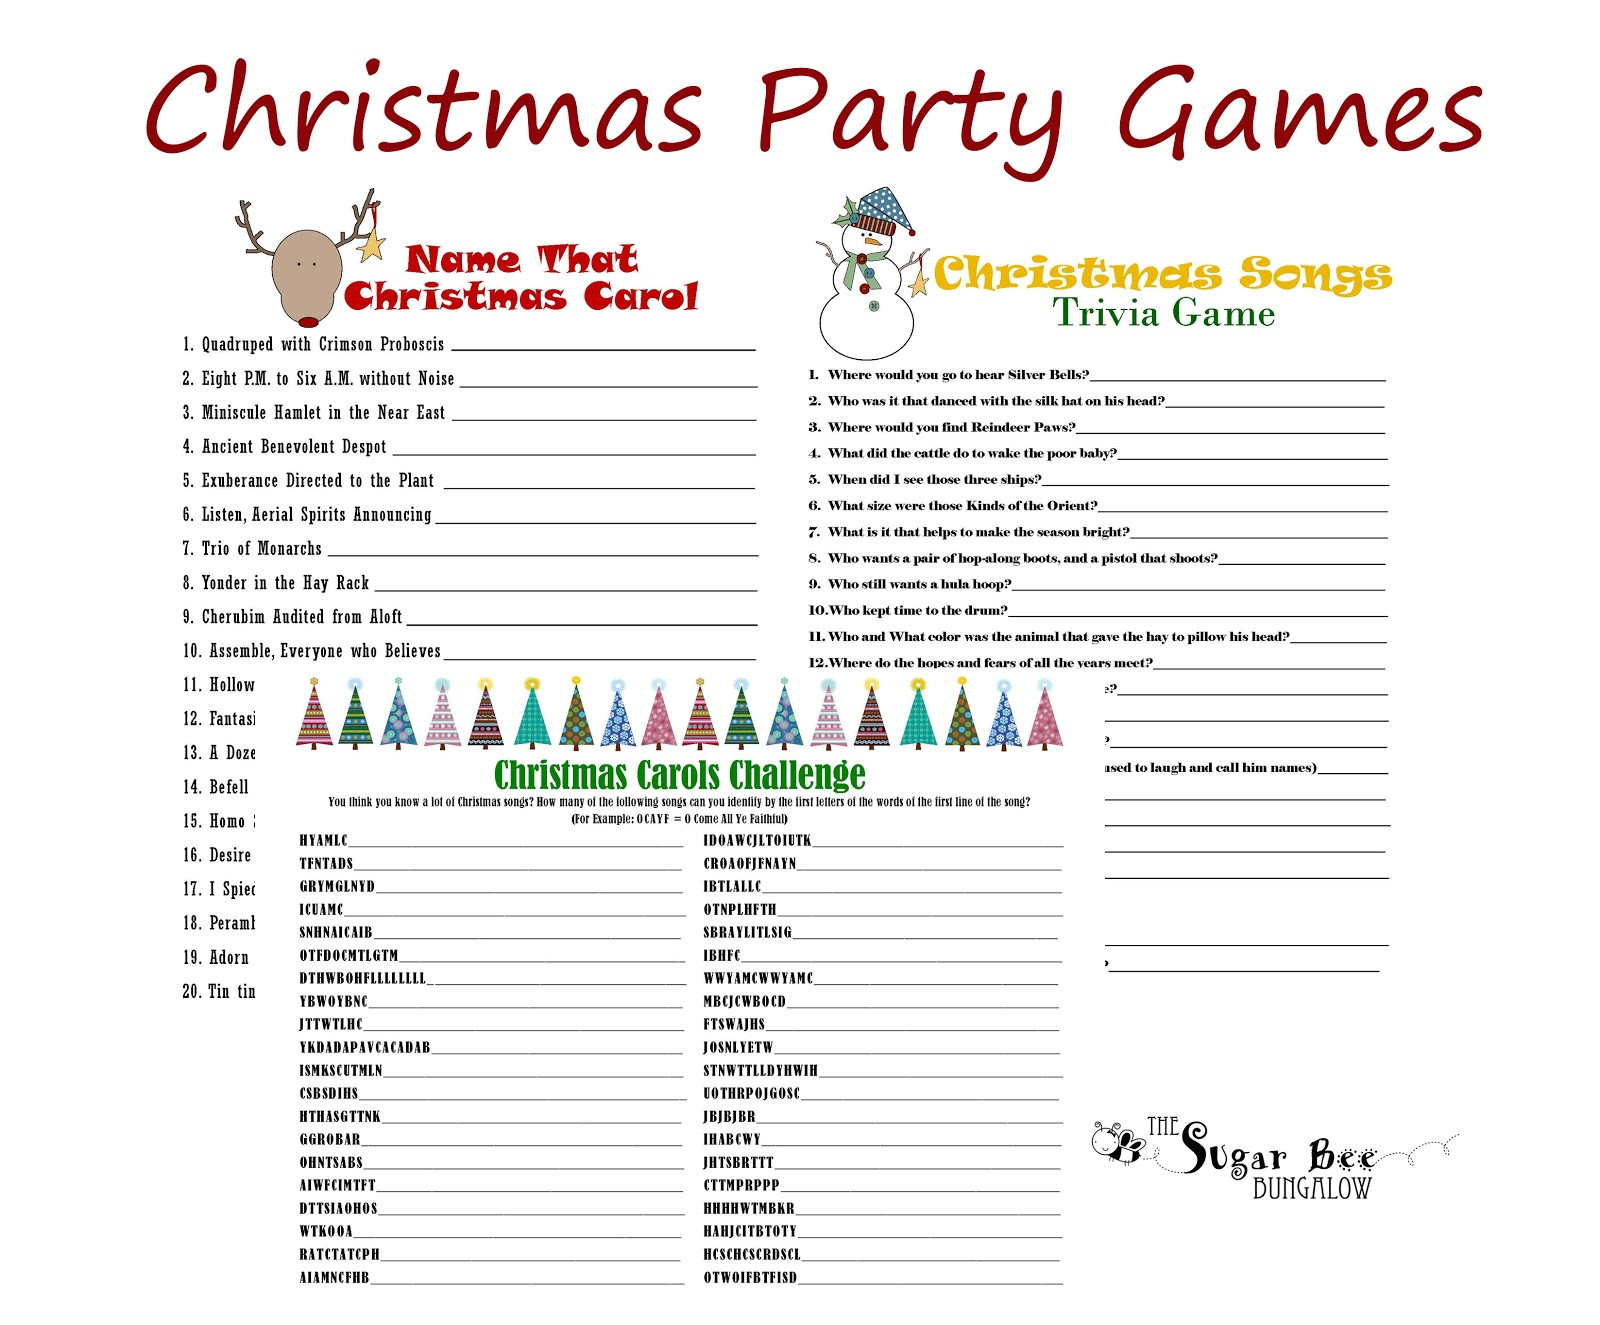 Group Christmas Party Ideas
 The Sugar Bee Bungalow December 2012